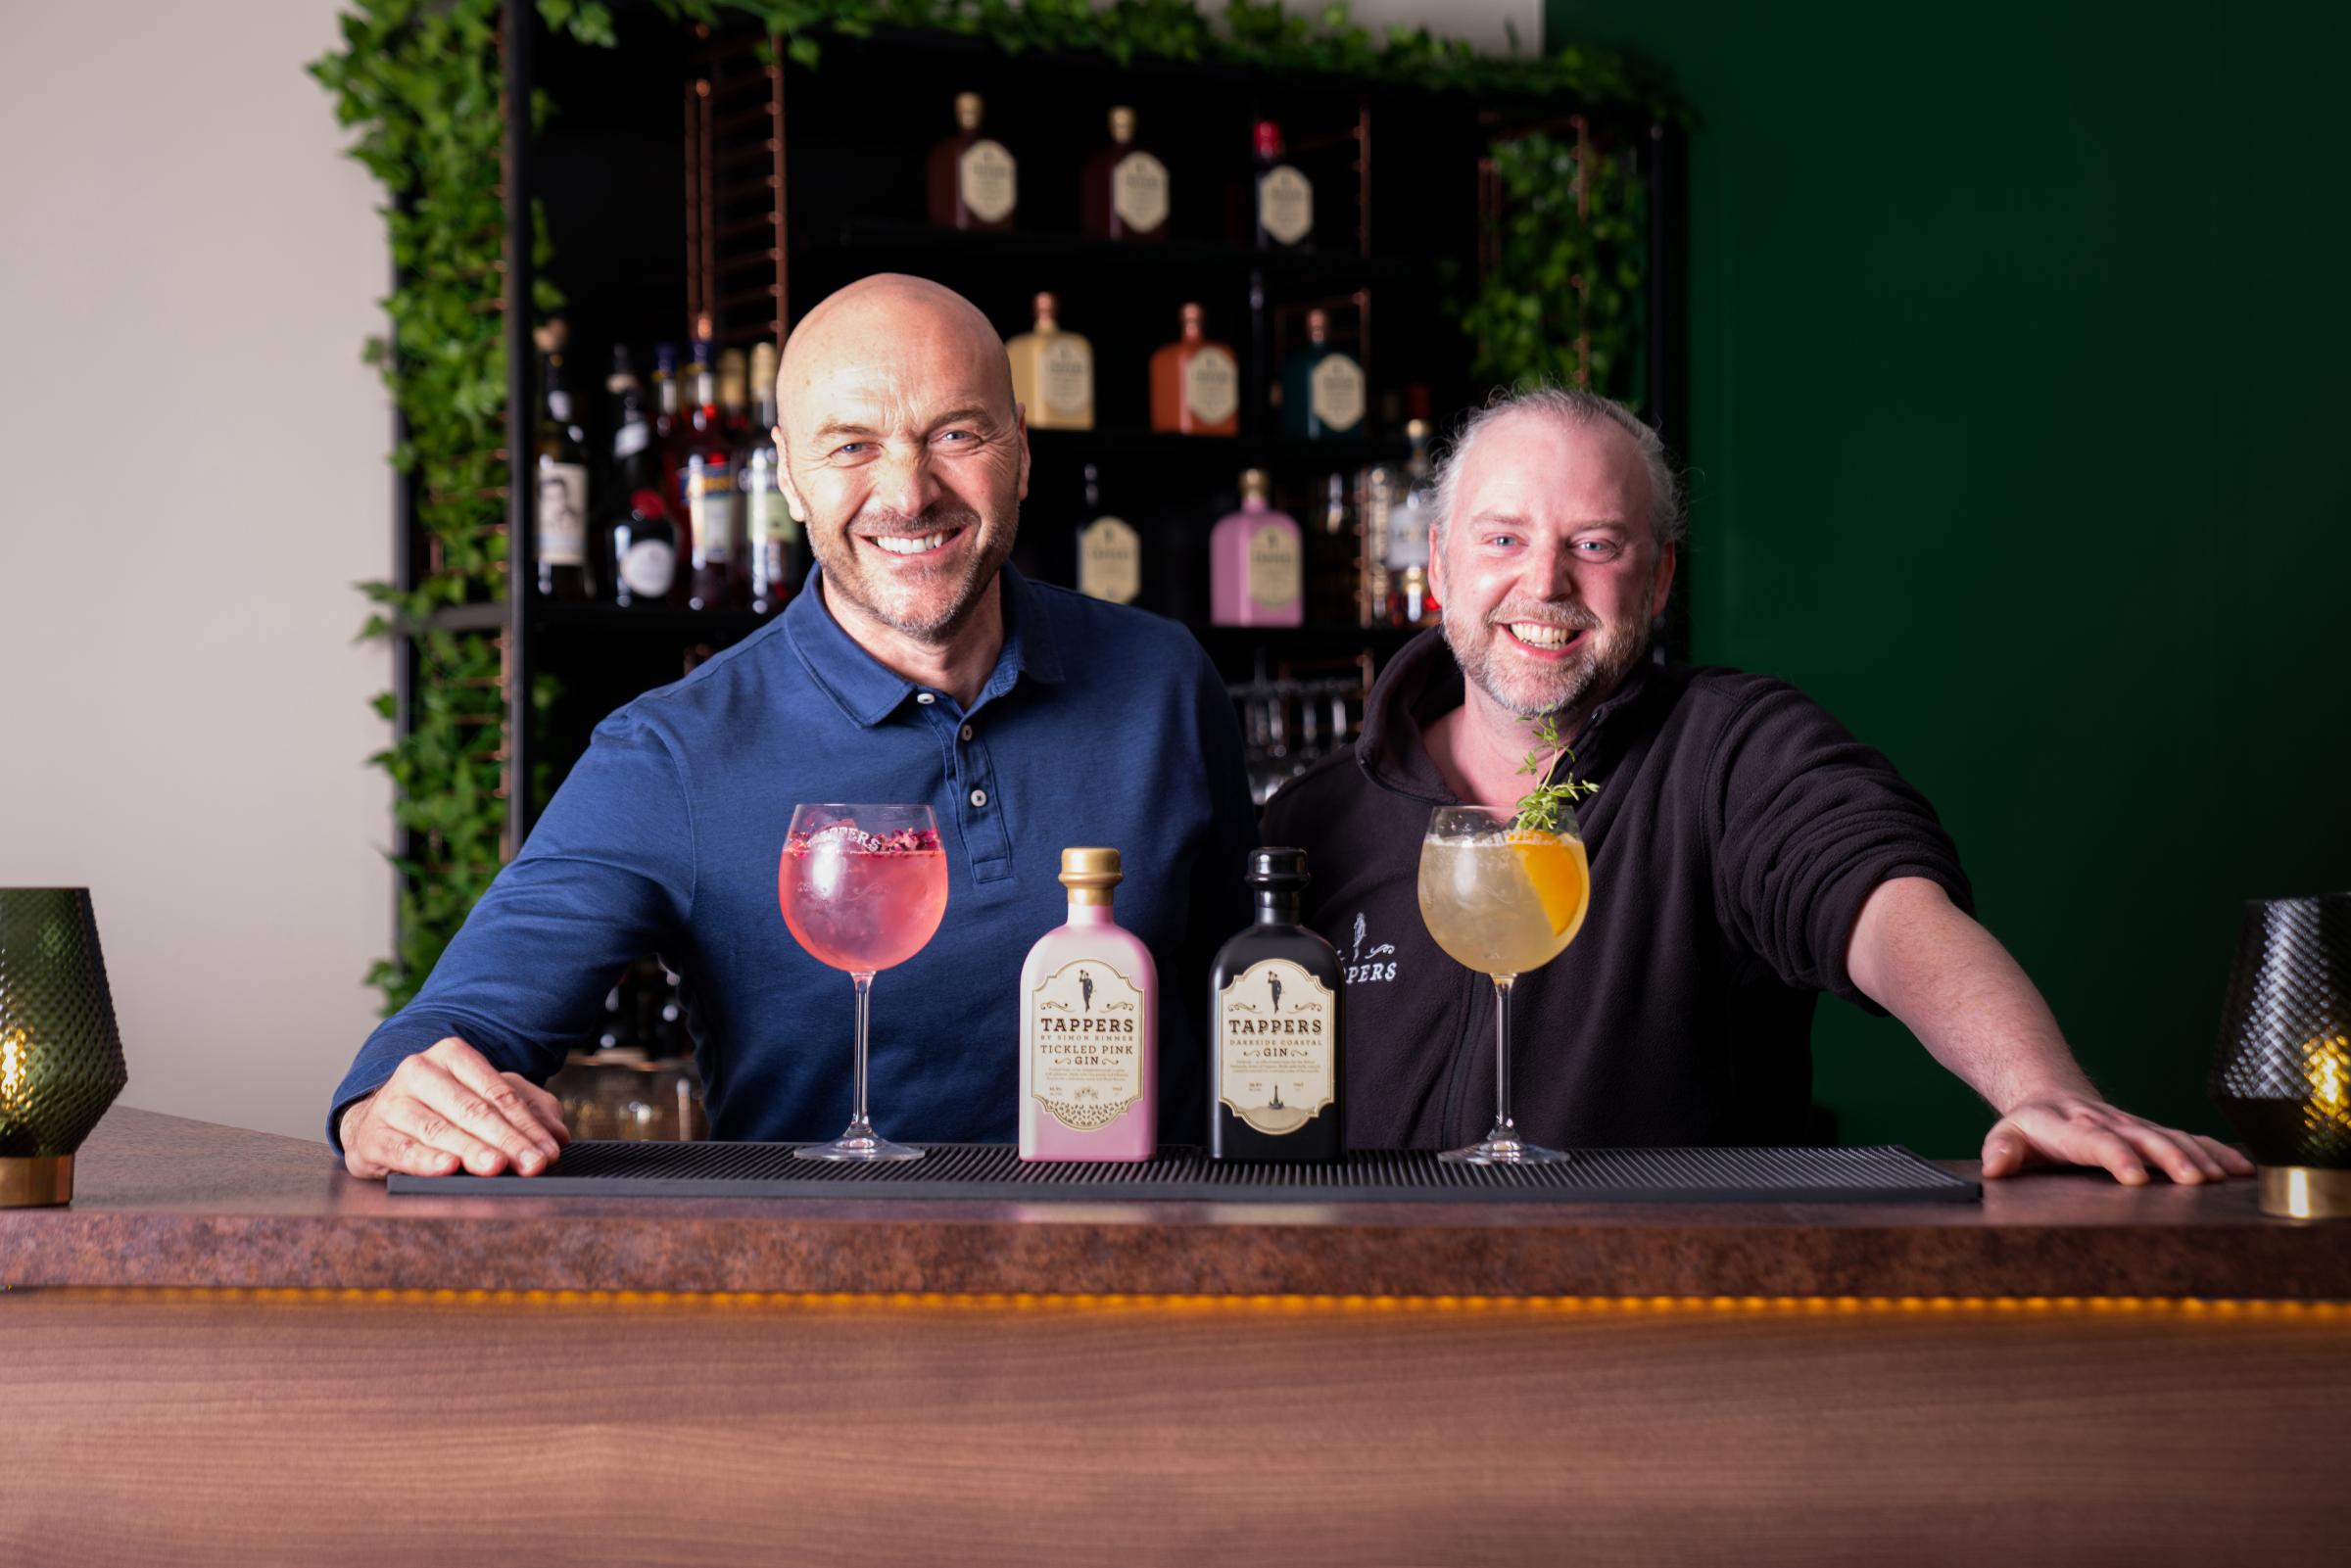 Simon Rimmer and Steve Tapril from Tappers Gin